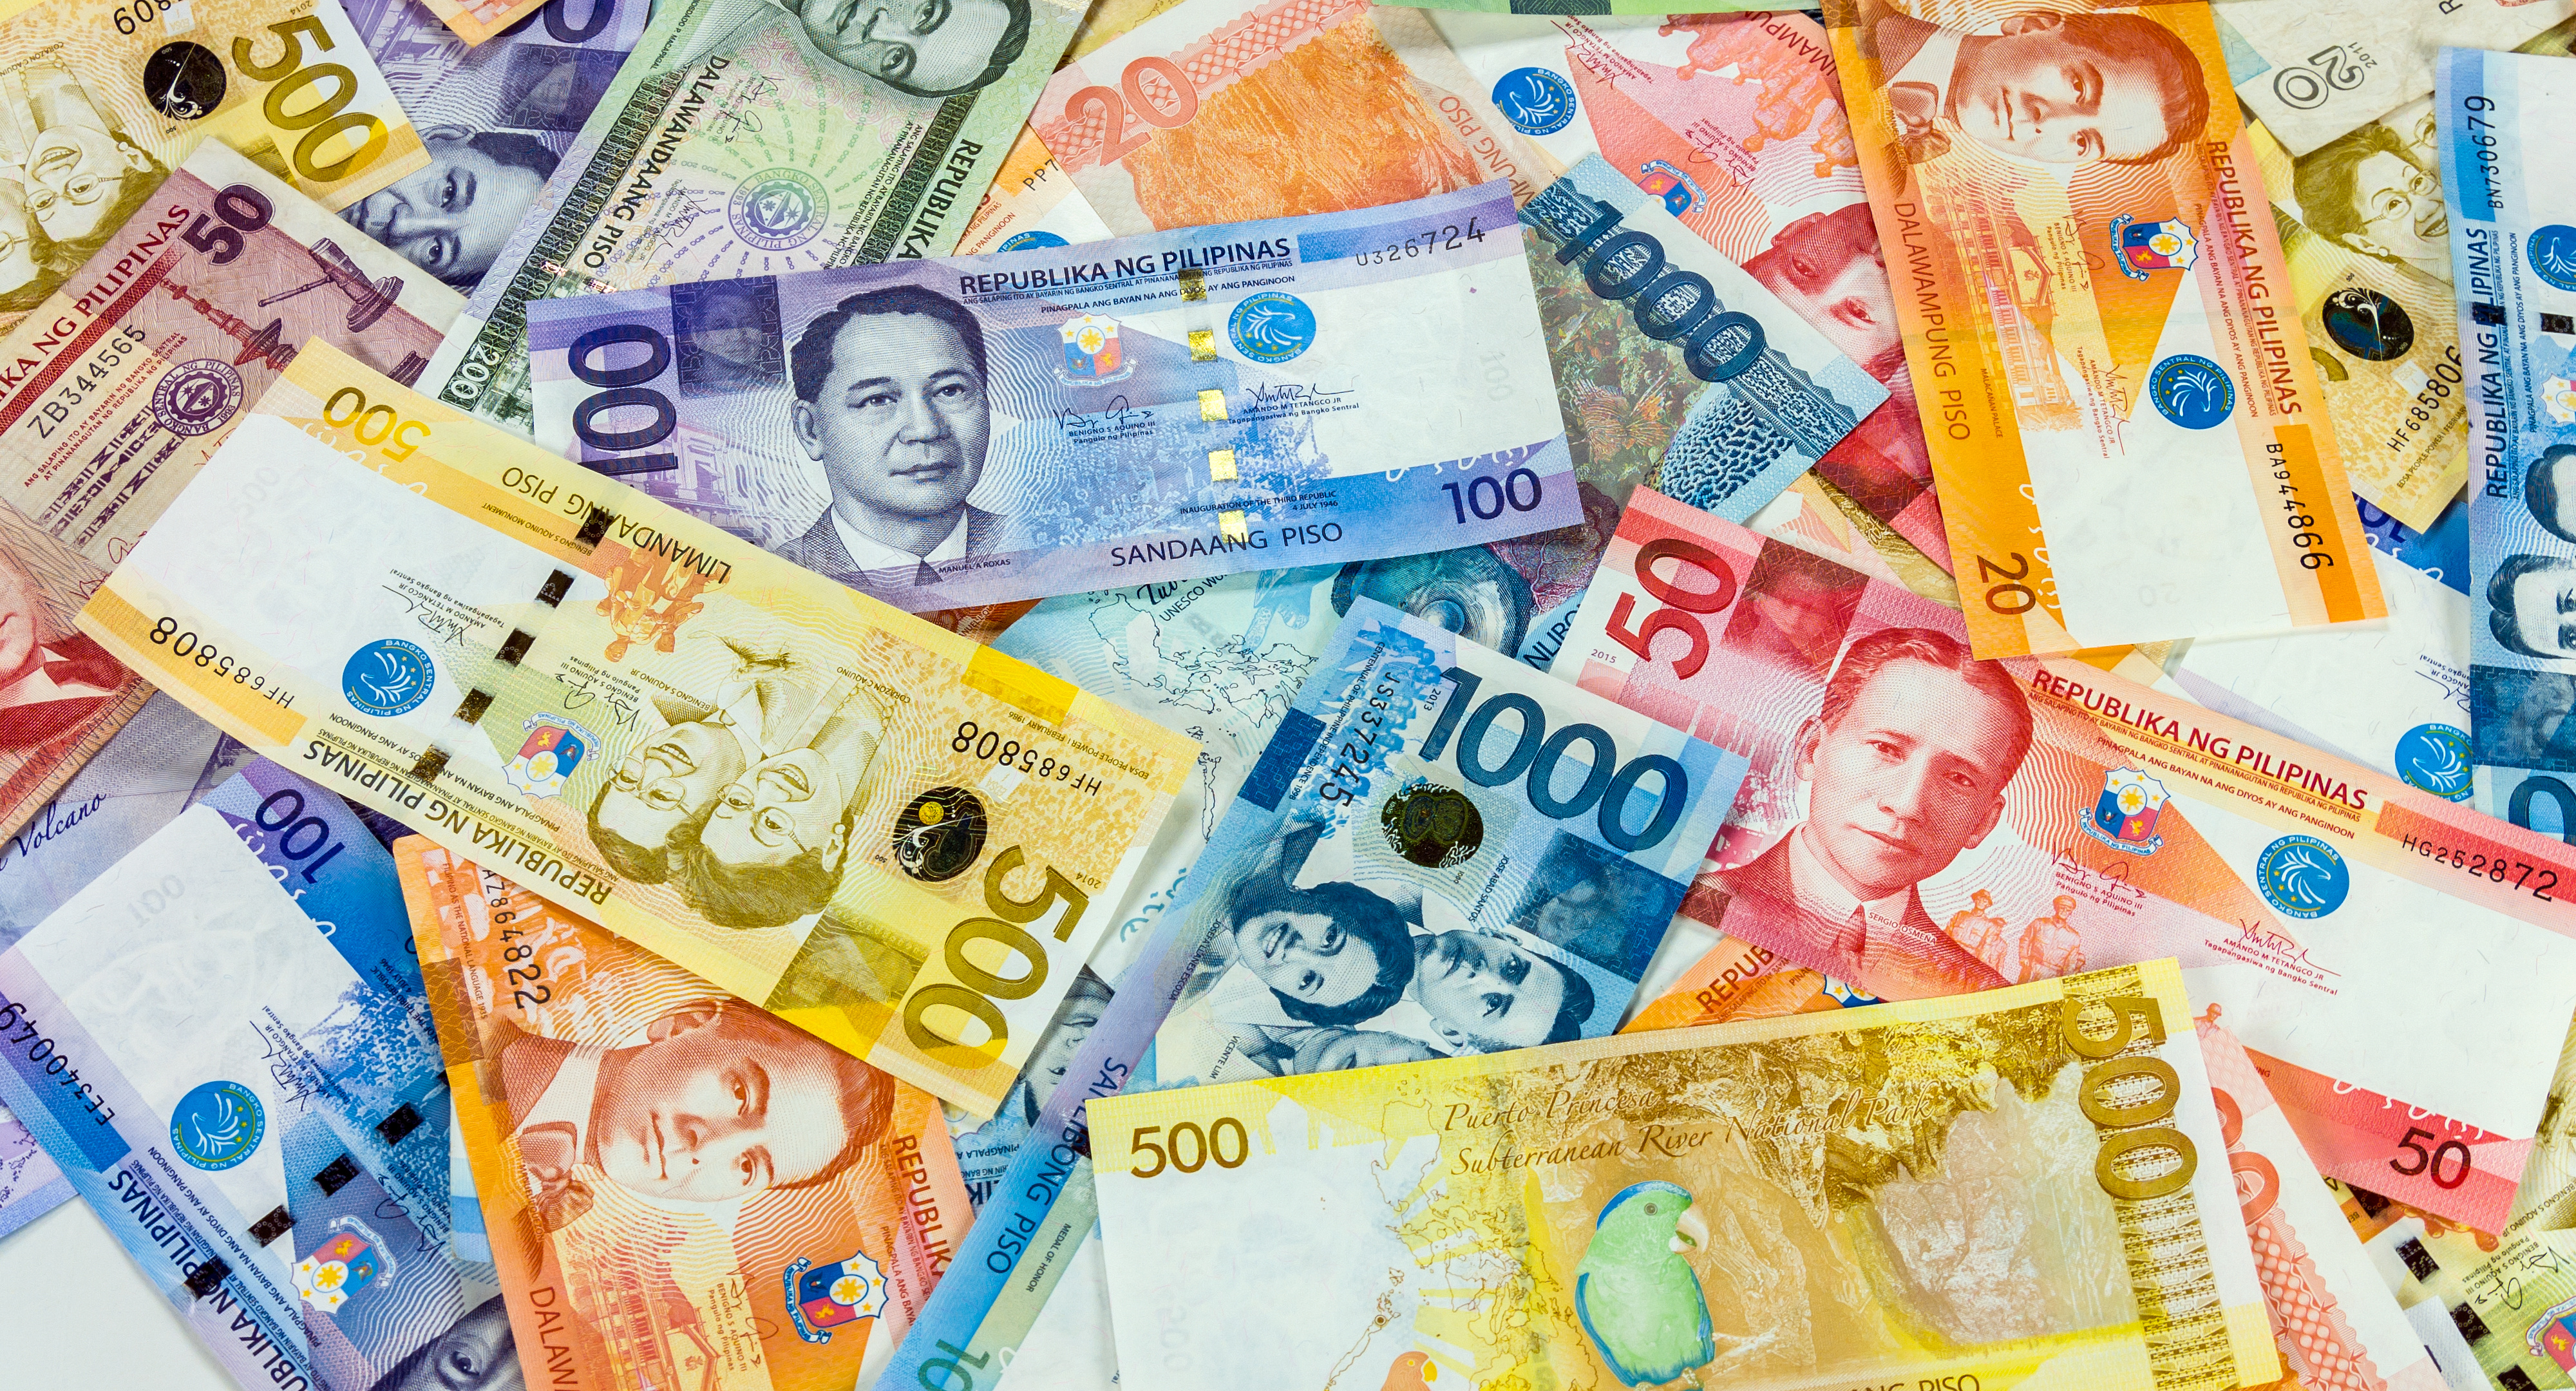 Colorful background of Philippines currency banknotes close up view.